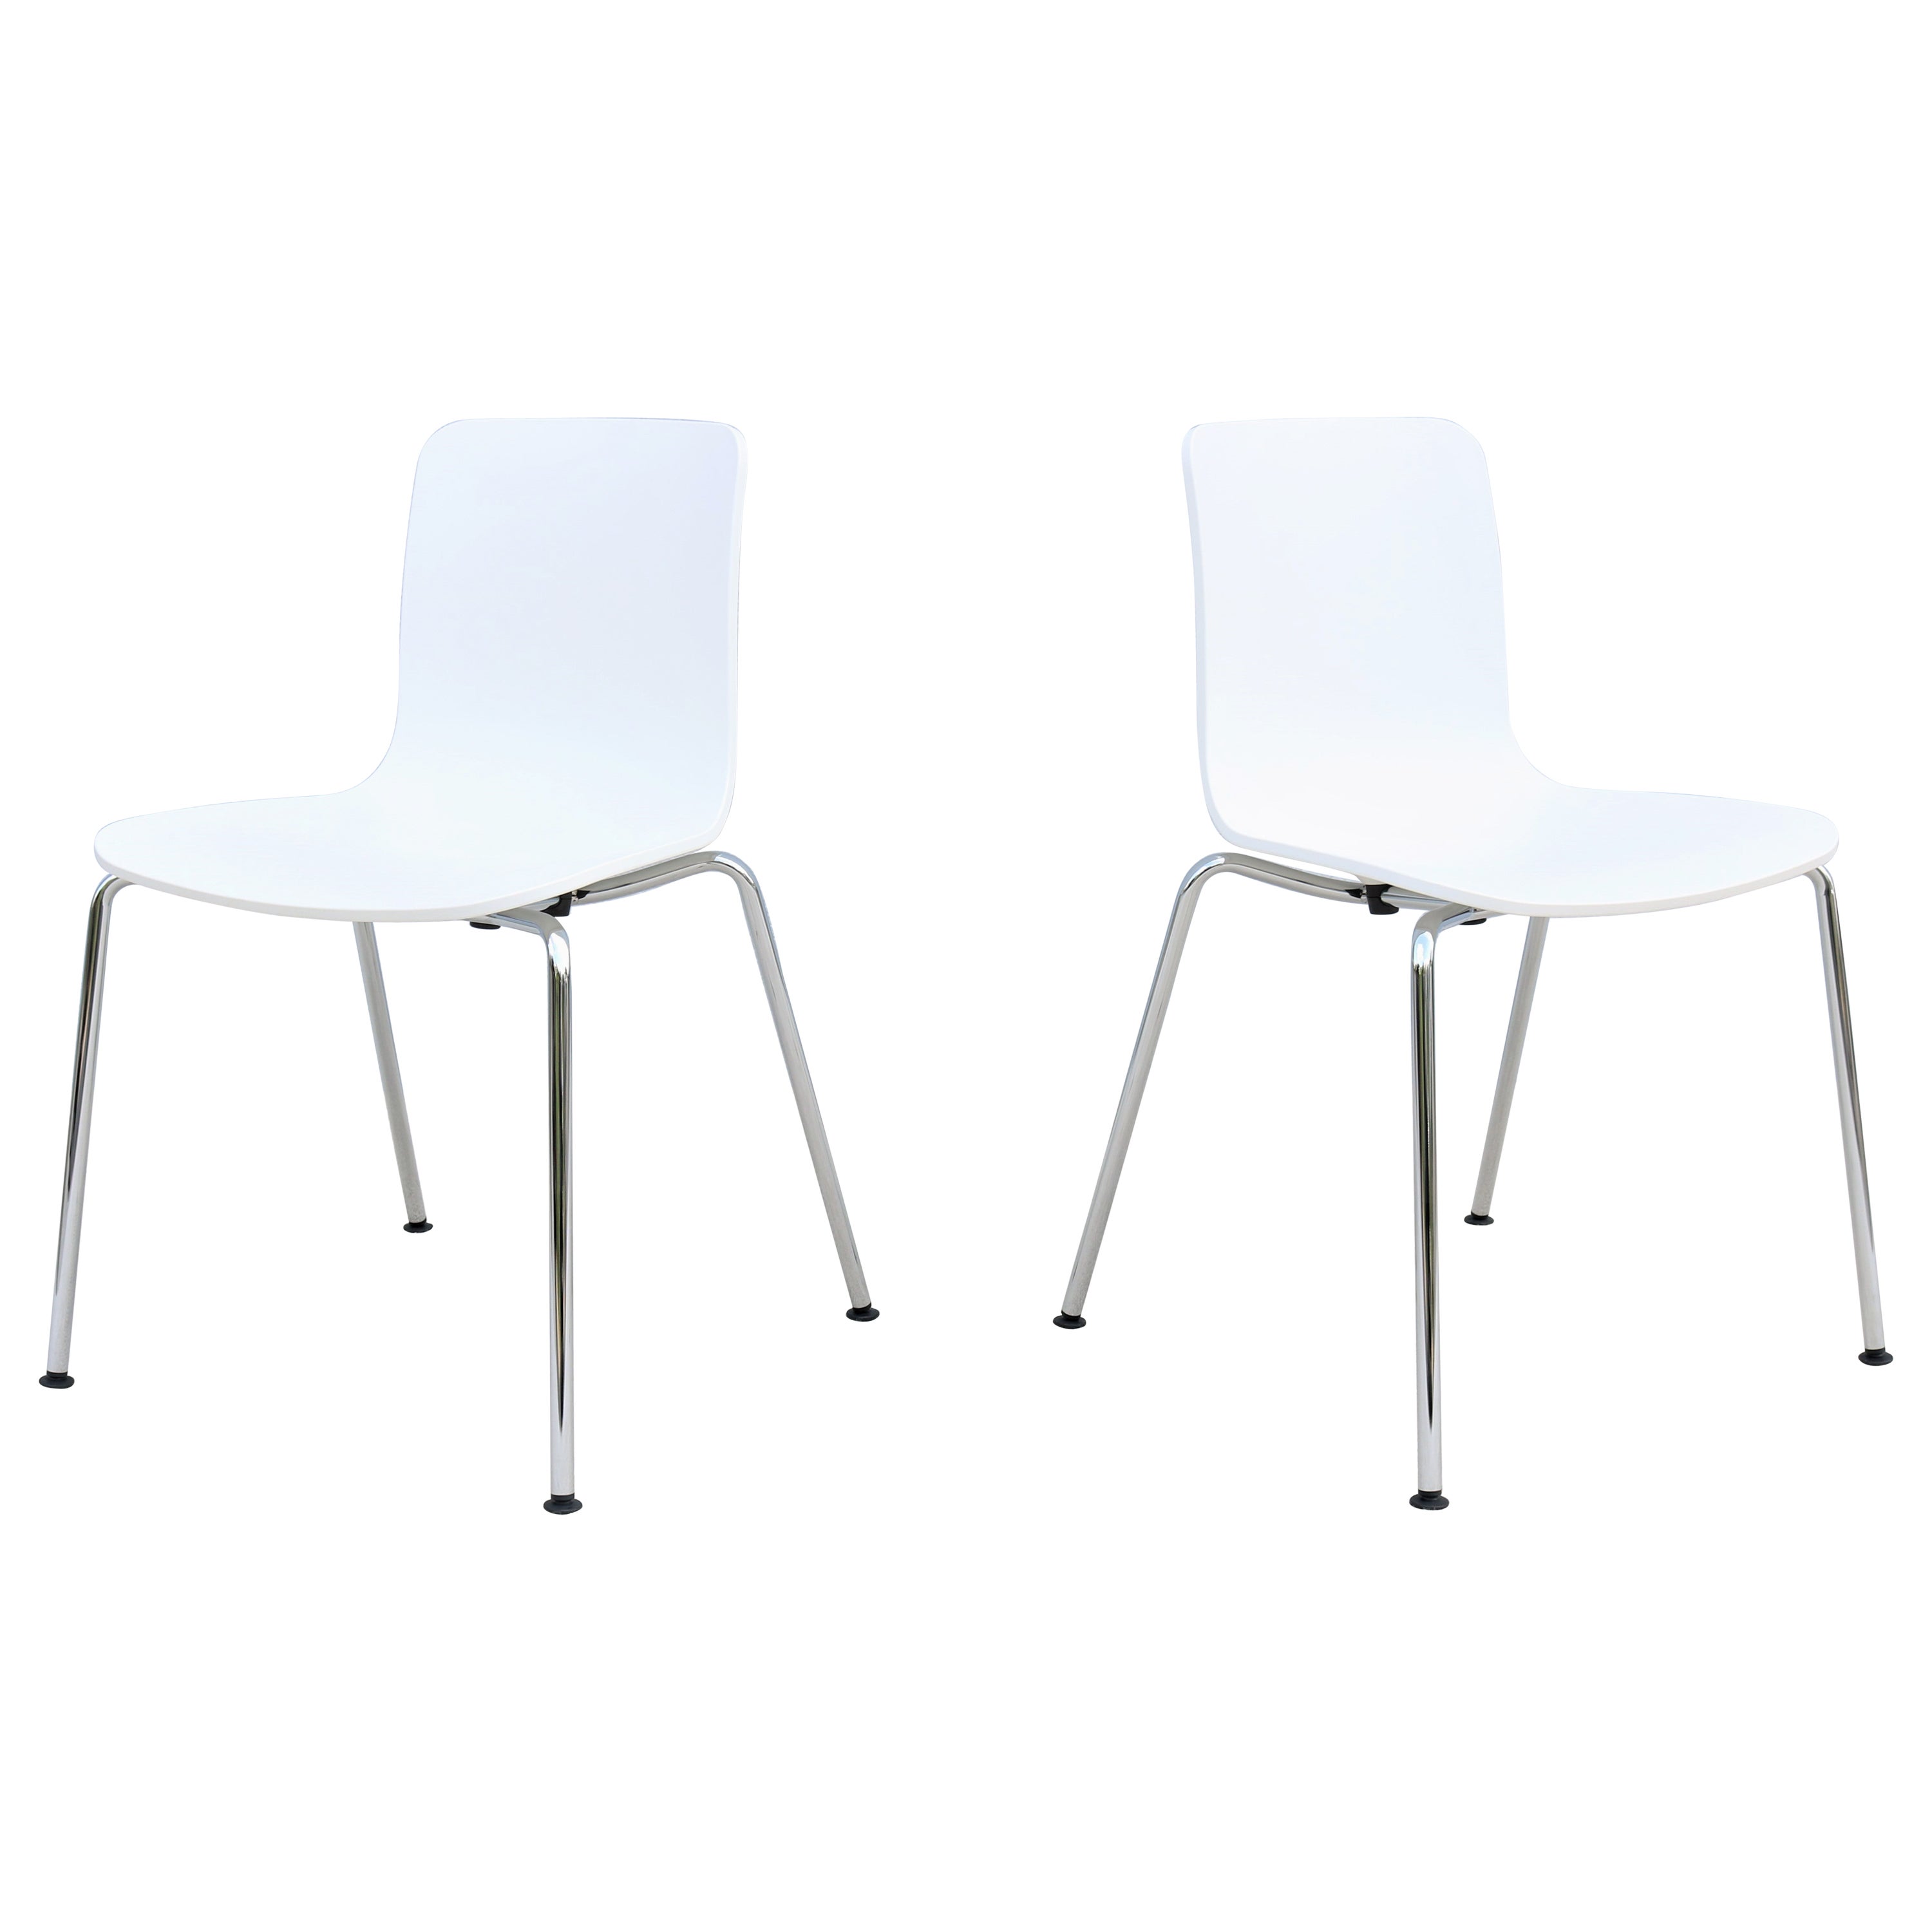 Modern Italy Jasper Morrison for Vitra HAL Tube Stackable Dining Chairs - a Pair